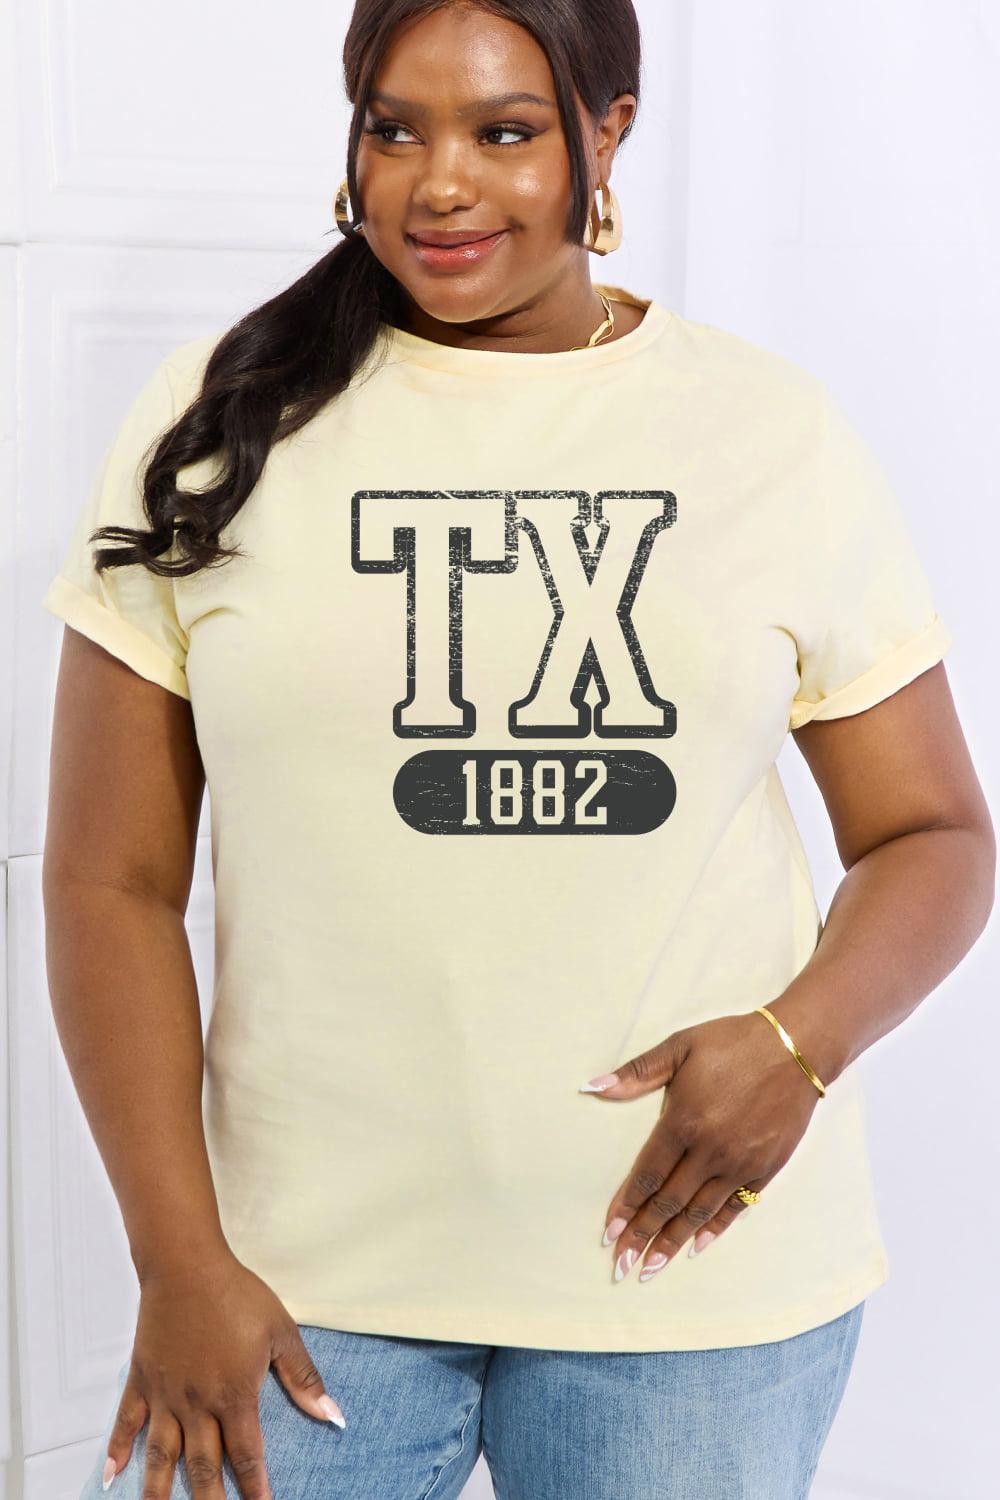 Simply Love Full Size TX 1882 Graphic Cotton Tee BLUE ZONE PLANET